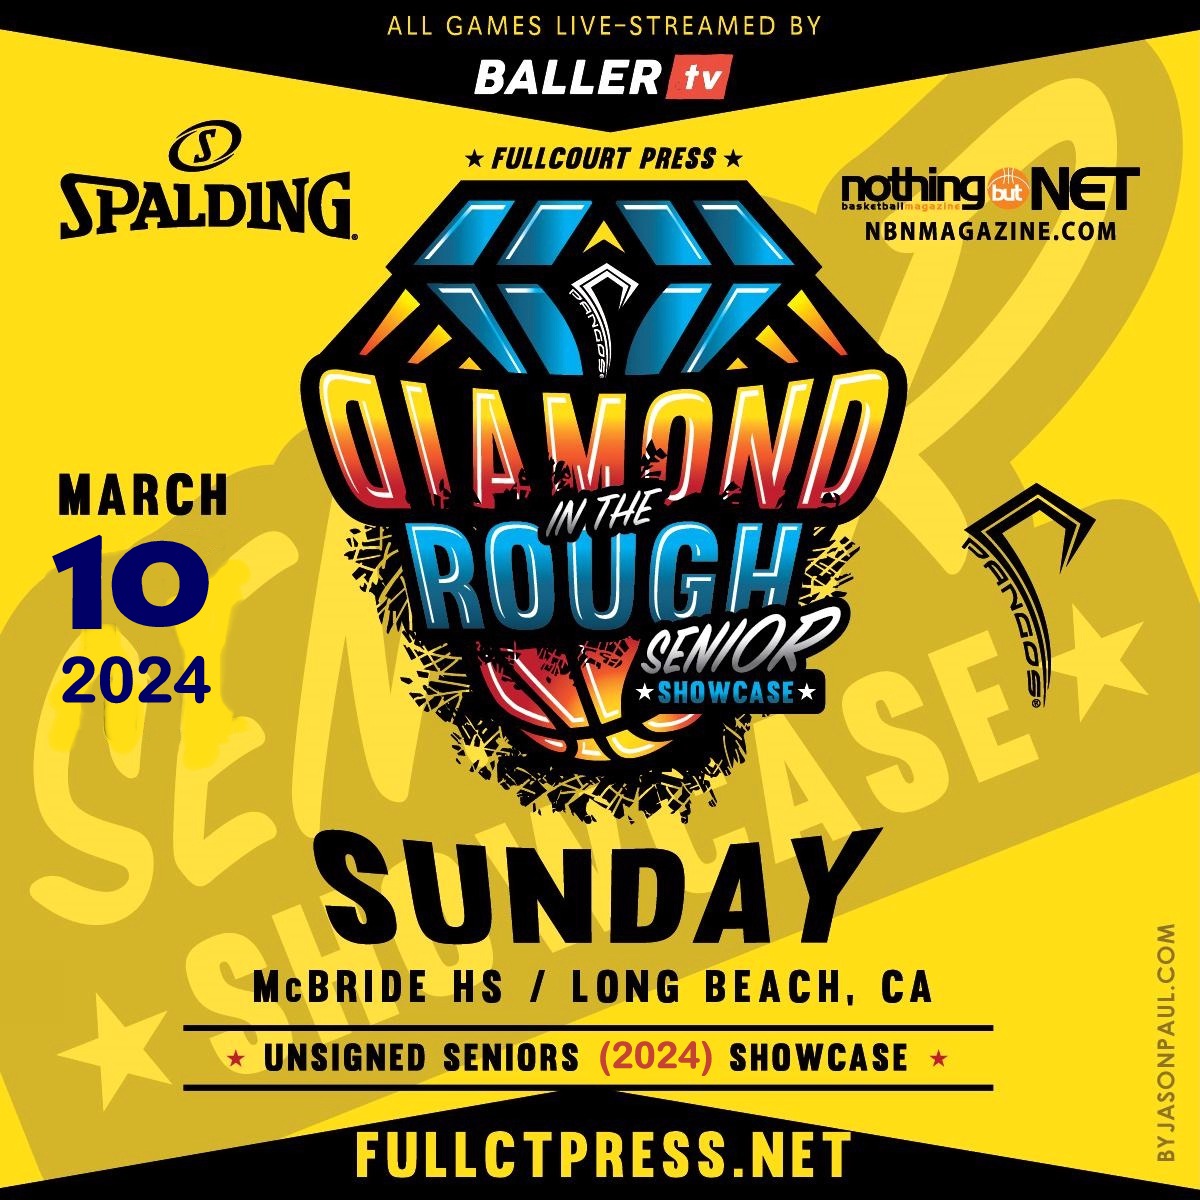 2024 @FCPPangos Diamond in Rough Senior Showcase for unsigned 2024 players set for Sun March 10 at McBride HS/Long Beach CA. All games live-streamed by @BallerTV. Secure your spot by registering at Fullctpress.net @FrankieBur @BeachCityHoops @NBNMagazine